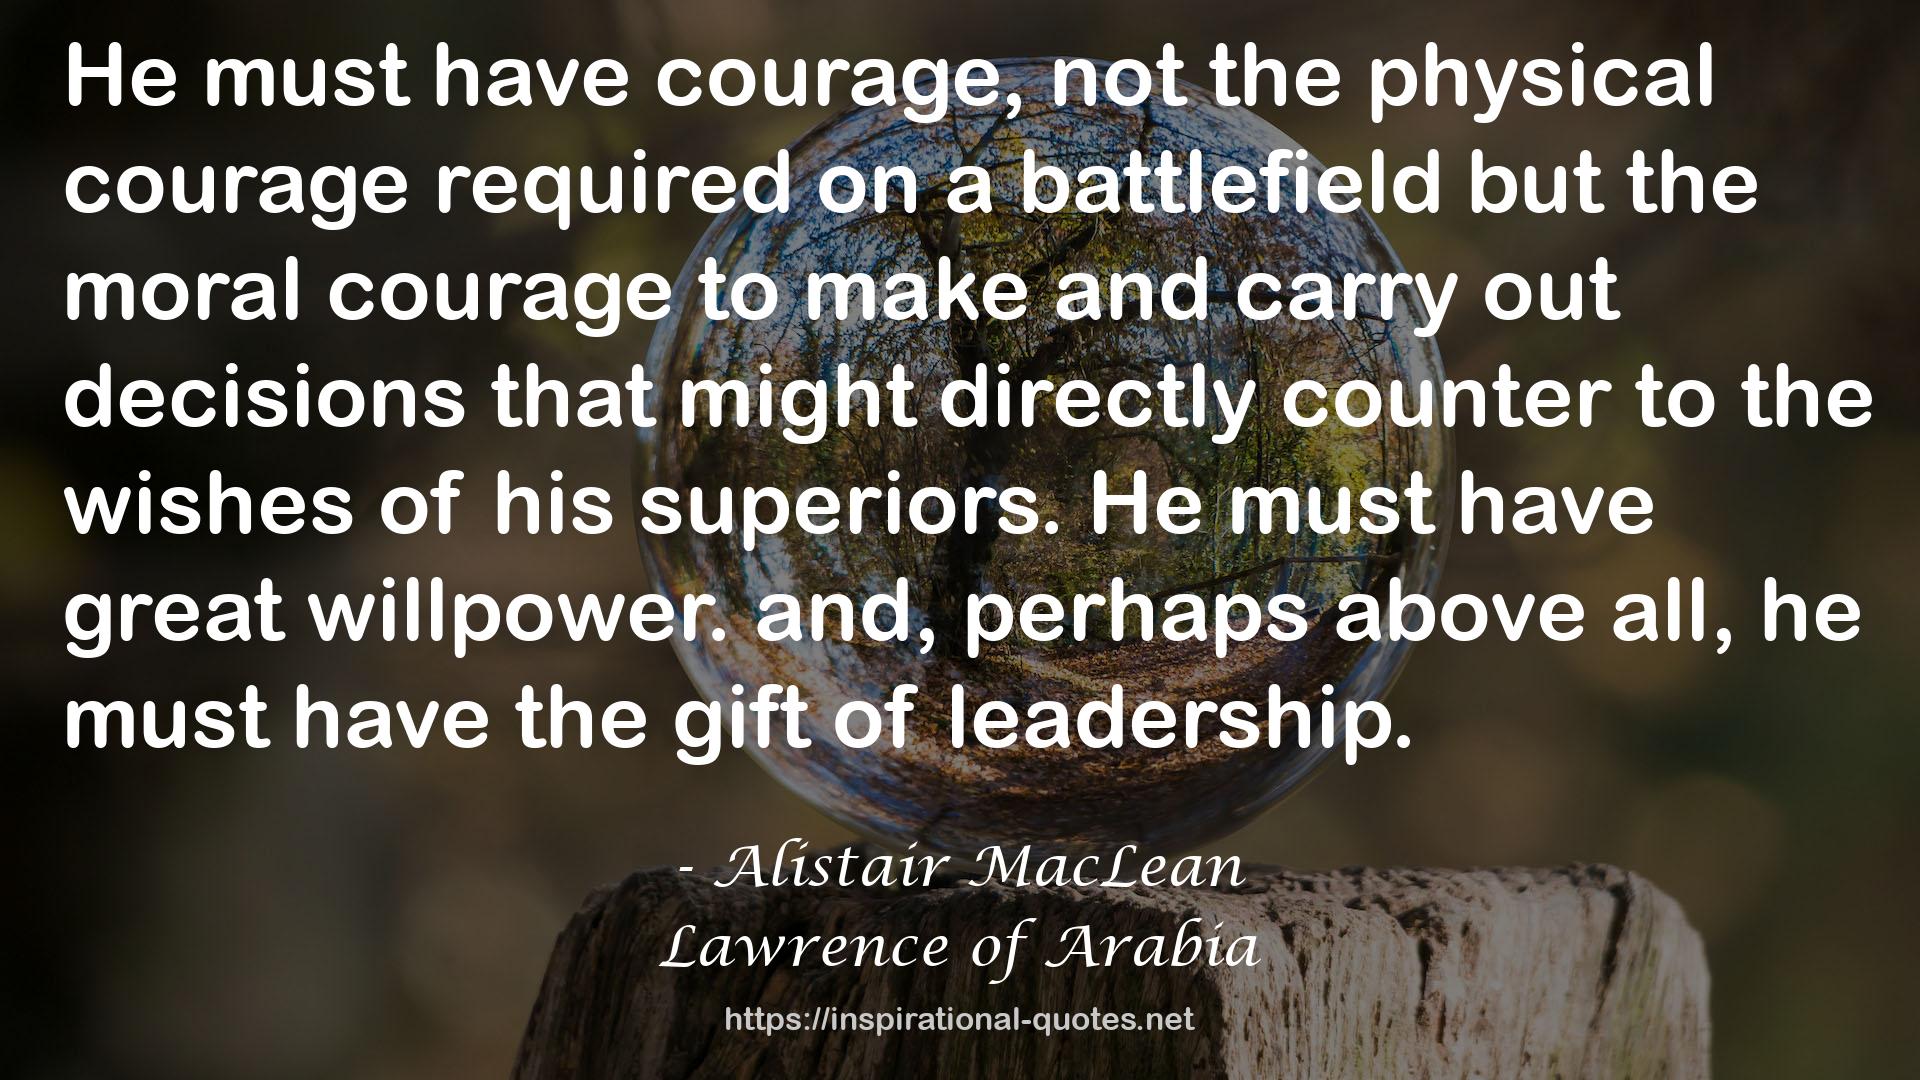 Lawrence of Arabia QUOTES